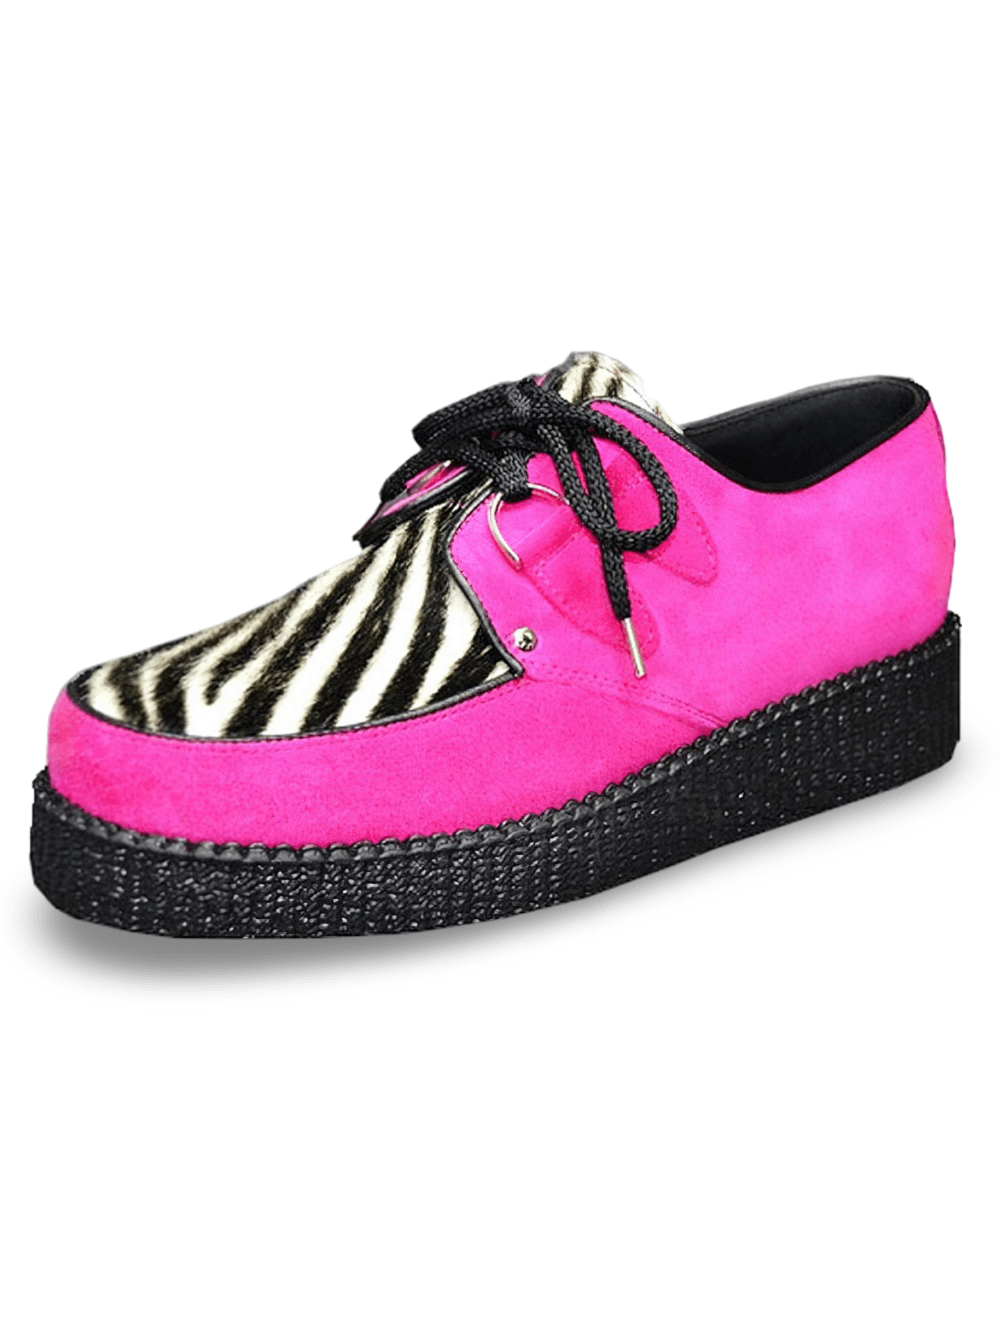 Pink Zebra Creepers with Suede Fur And Lace-Up